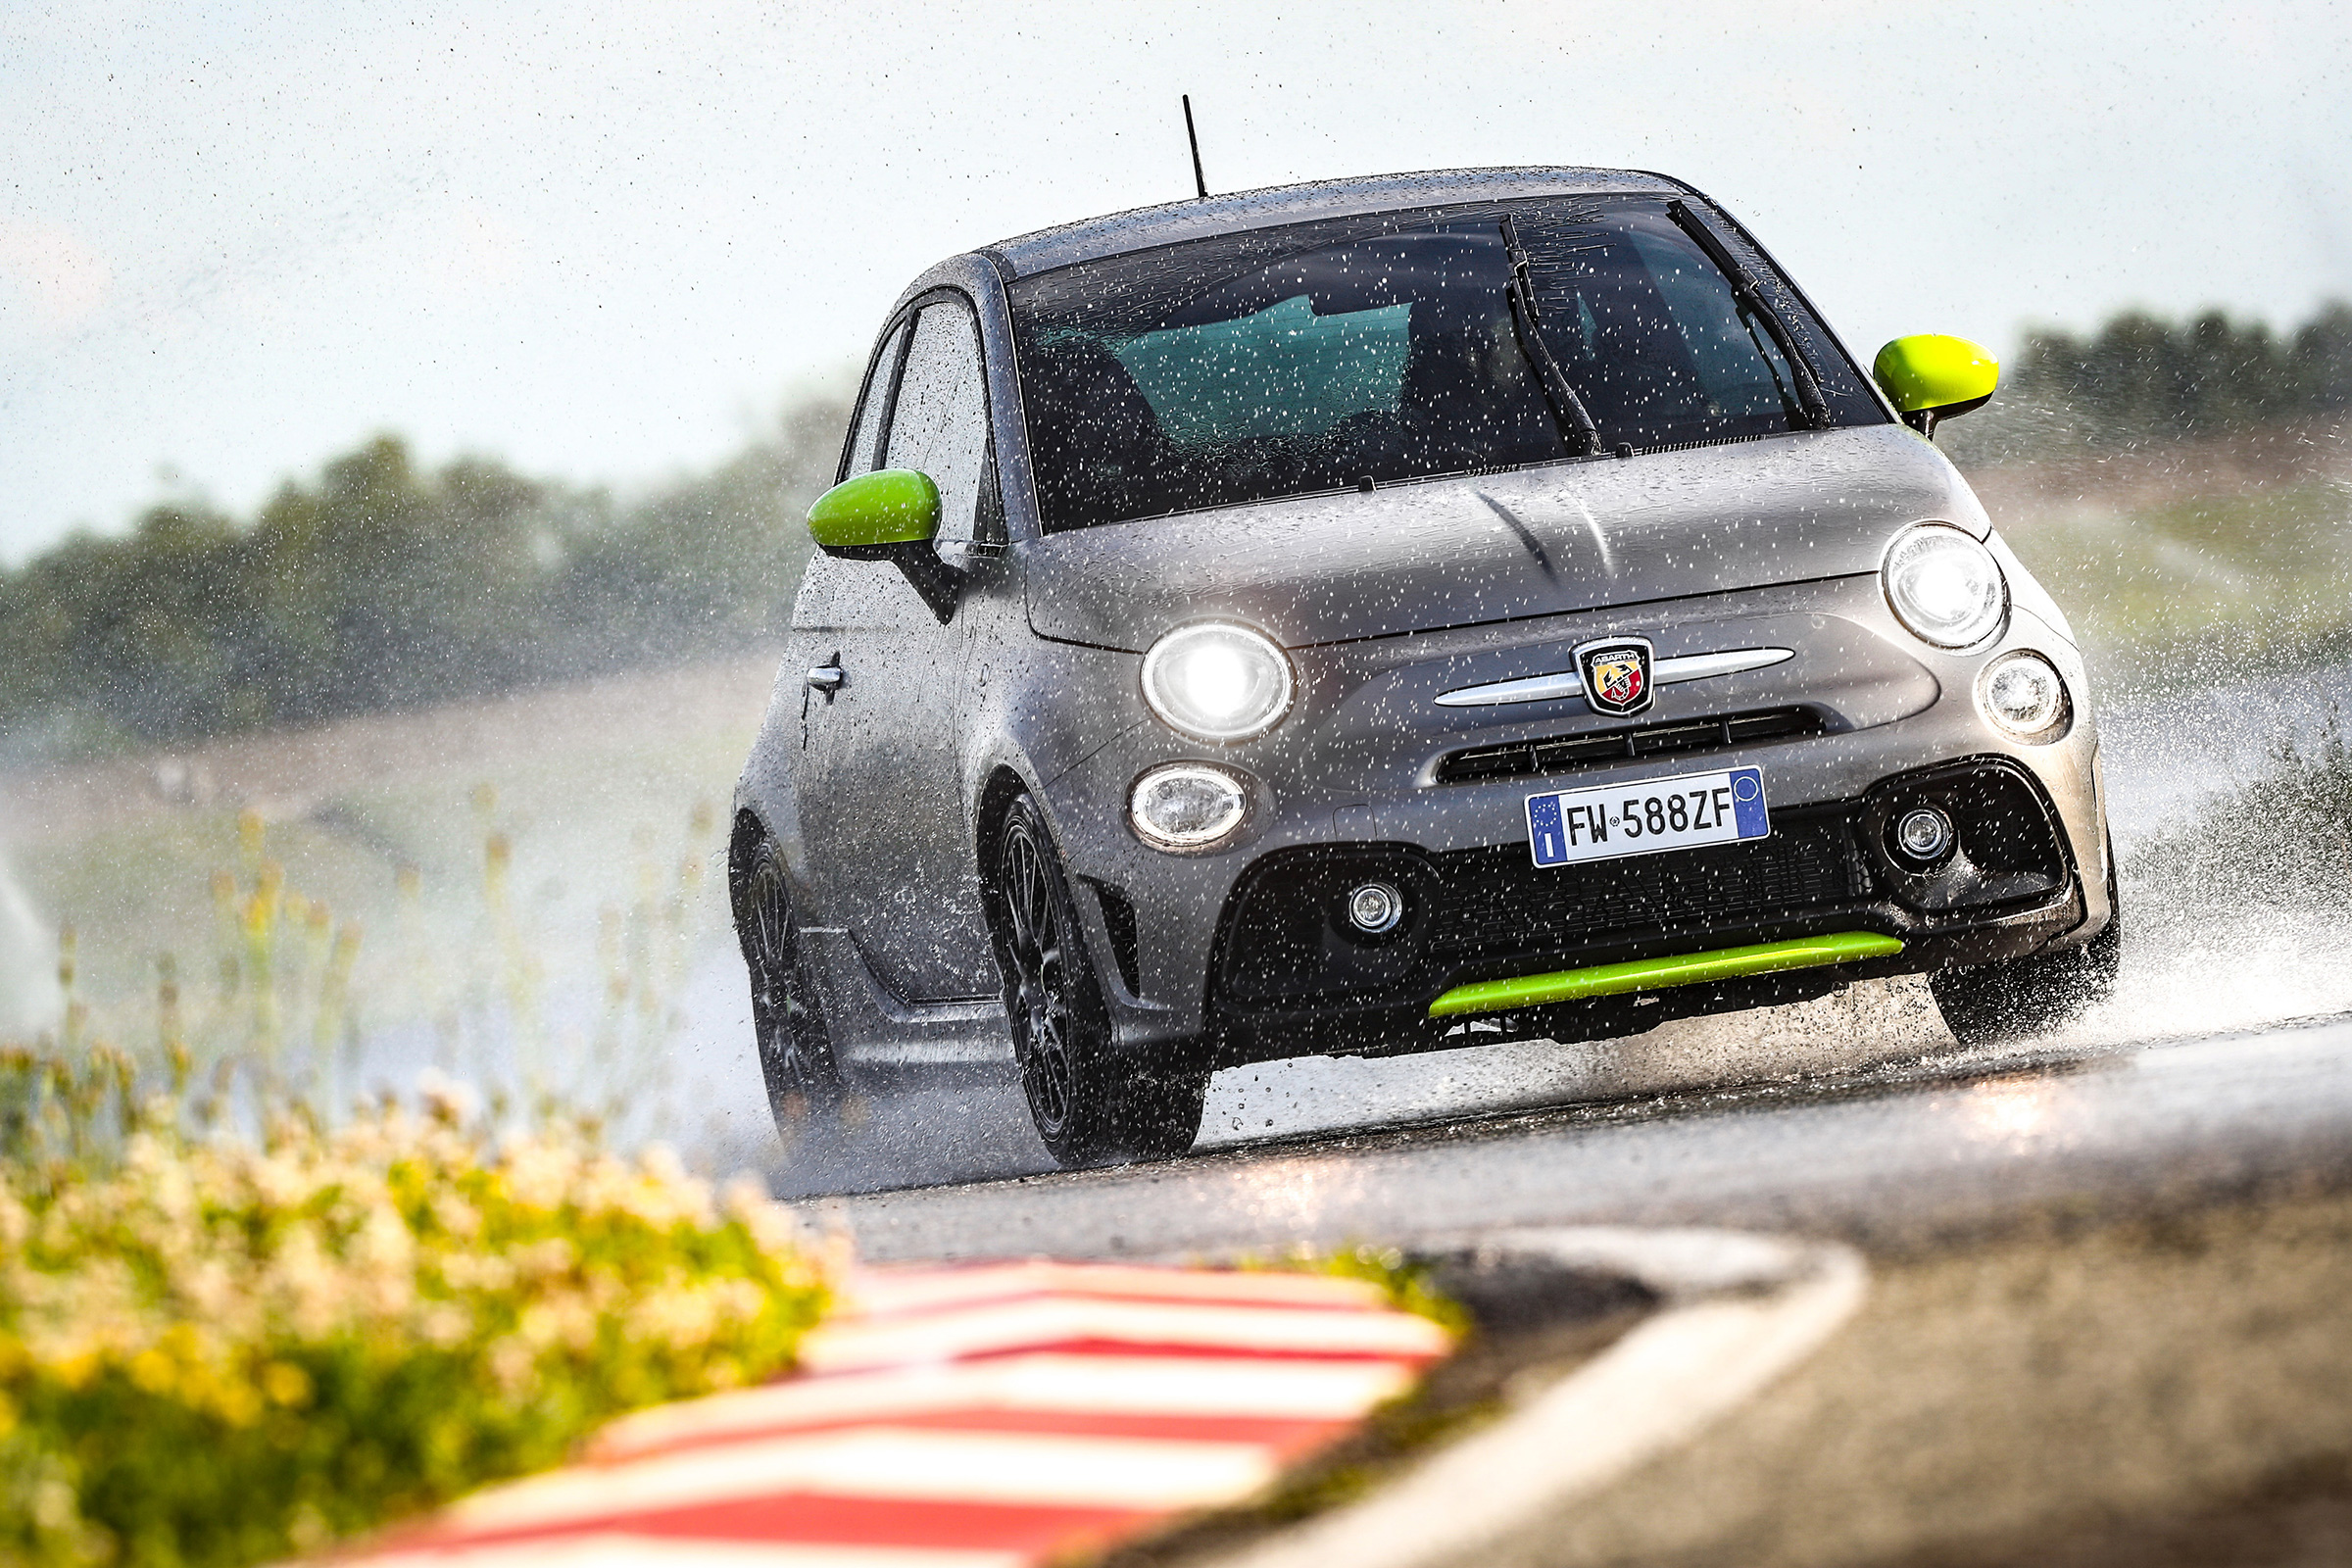 2020 Abarth 595 Pista arrives with 162bhp